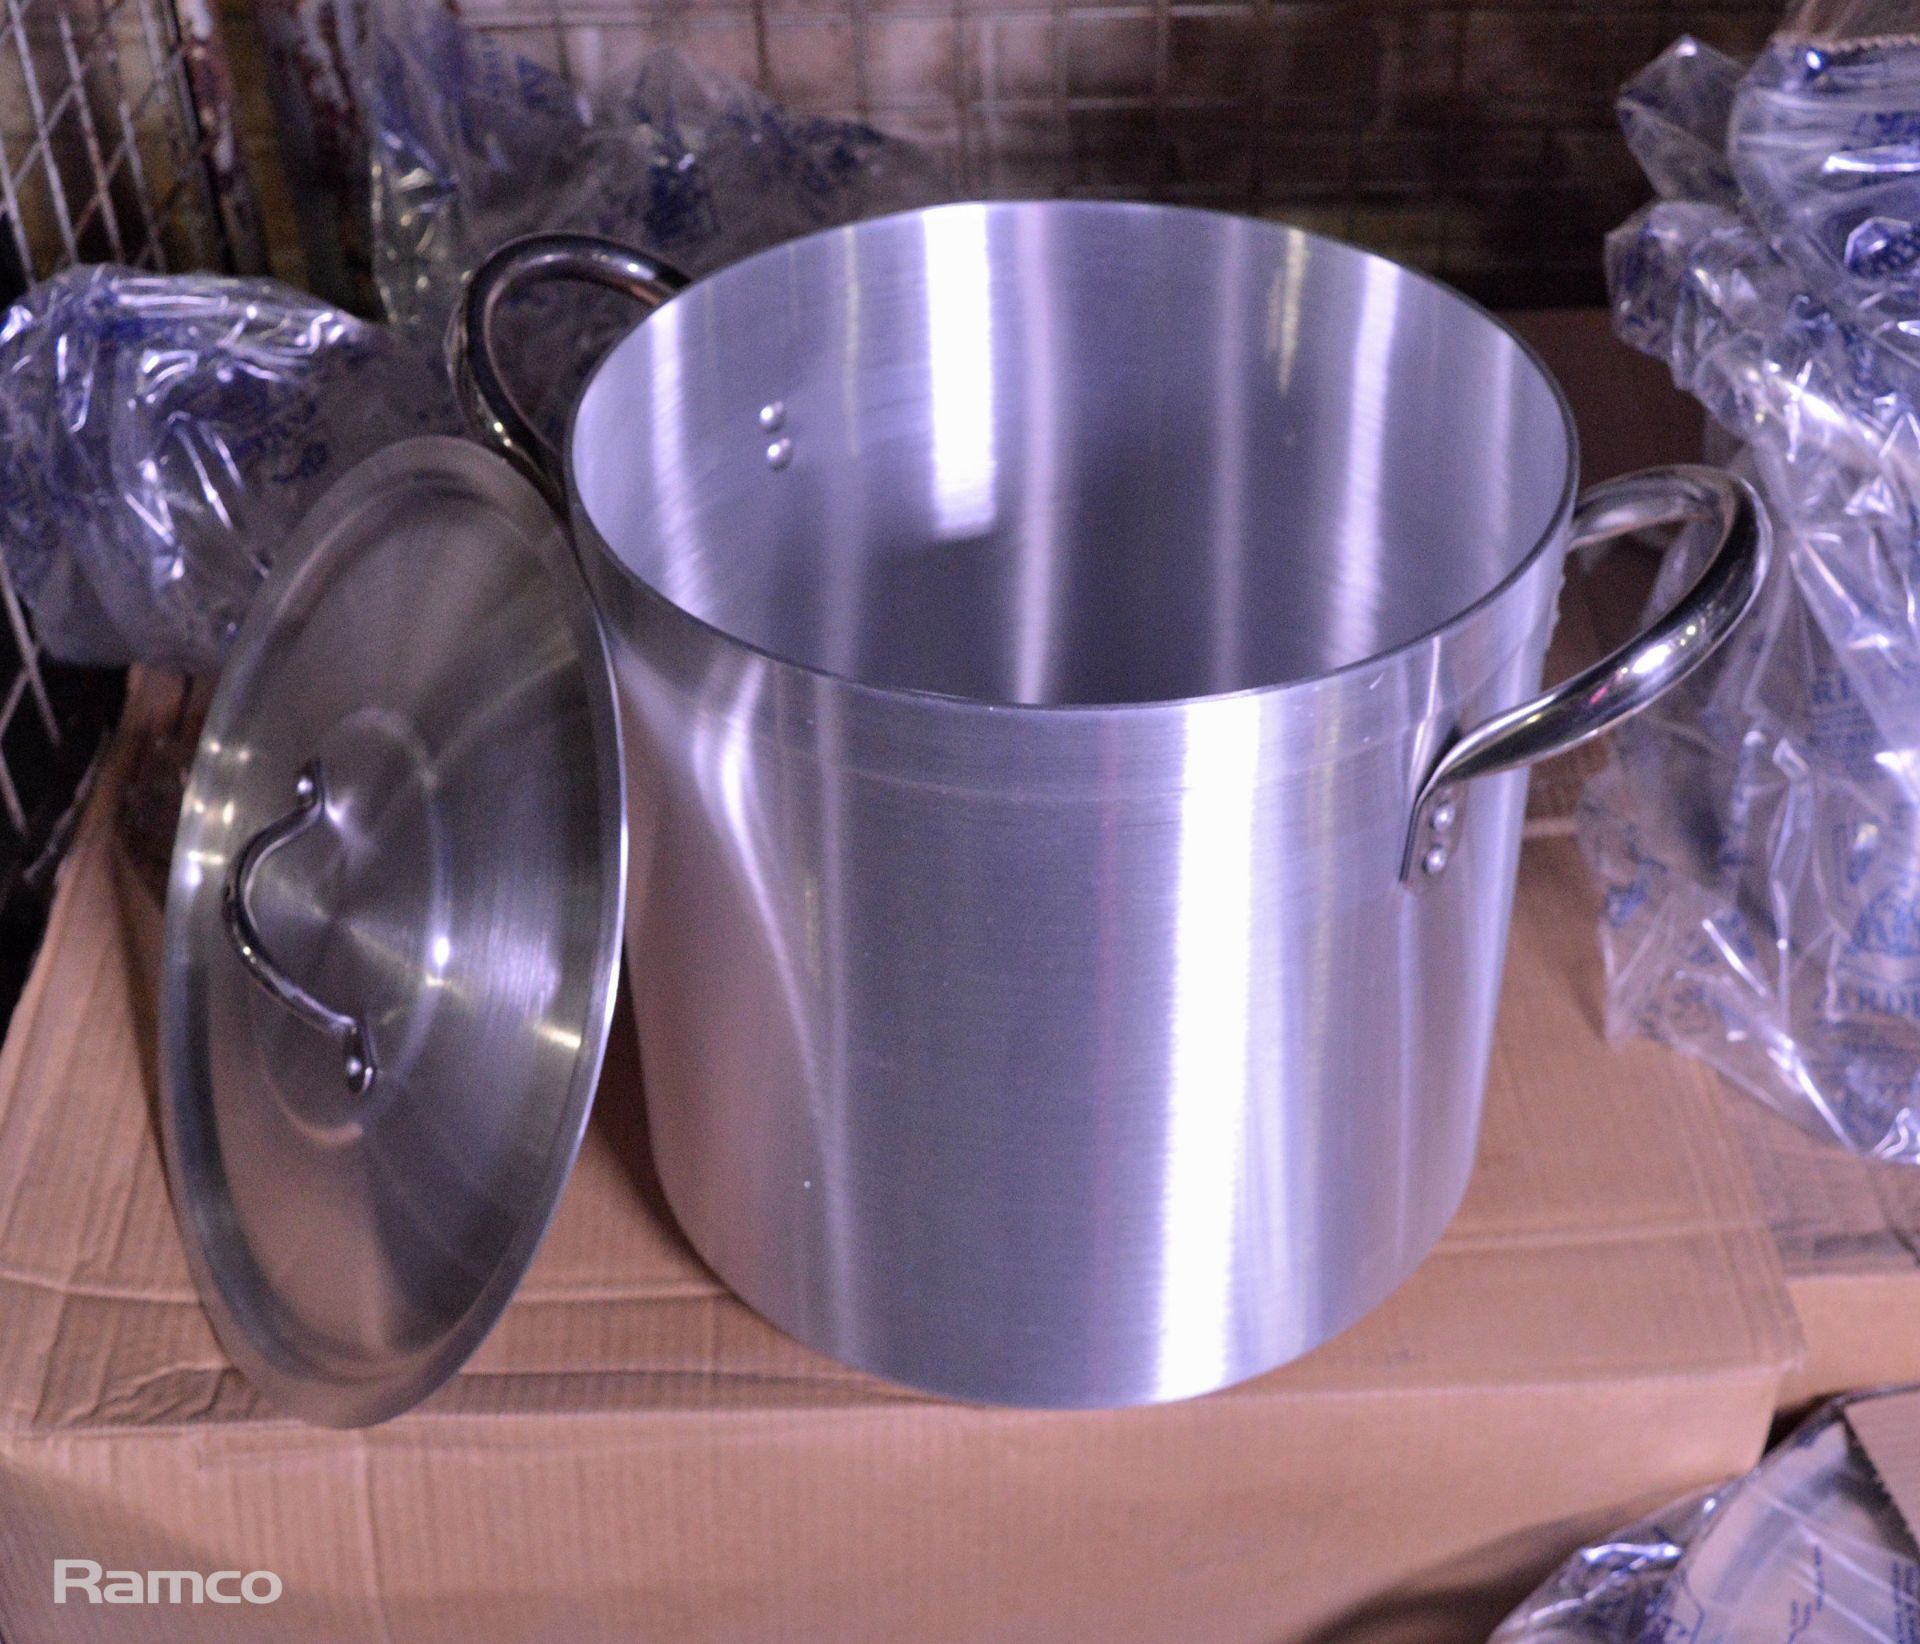 7x 28cm Stainless Steel Stock Pots - Image 2 of 2